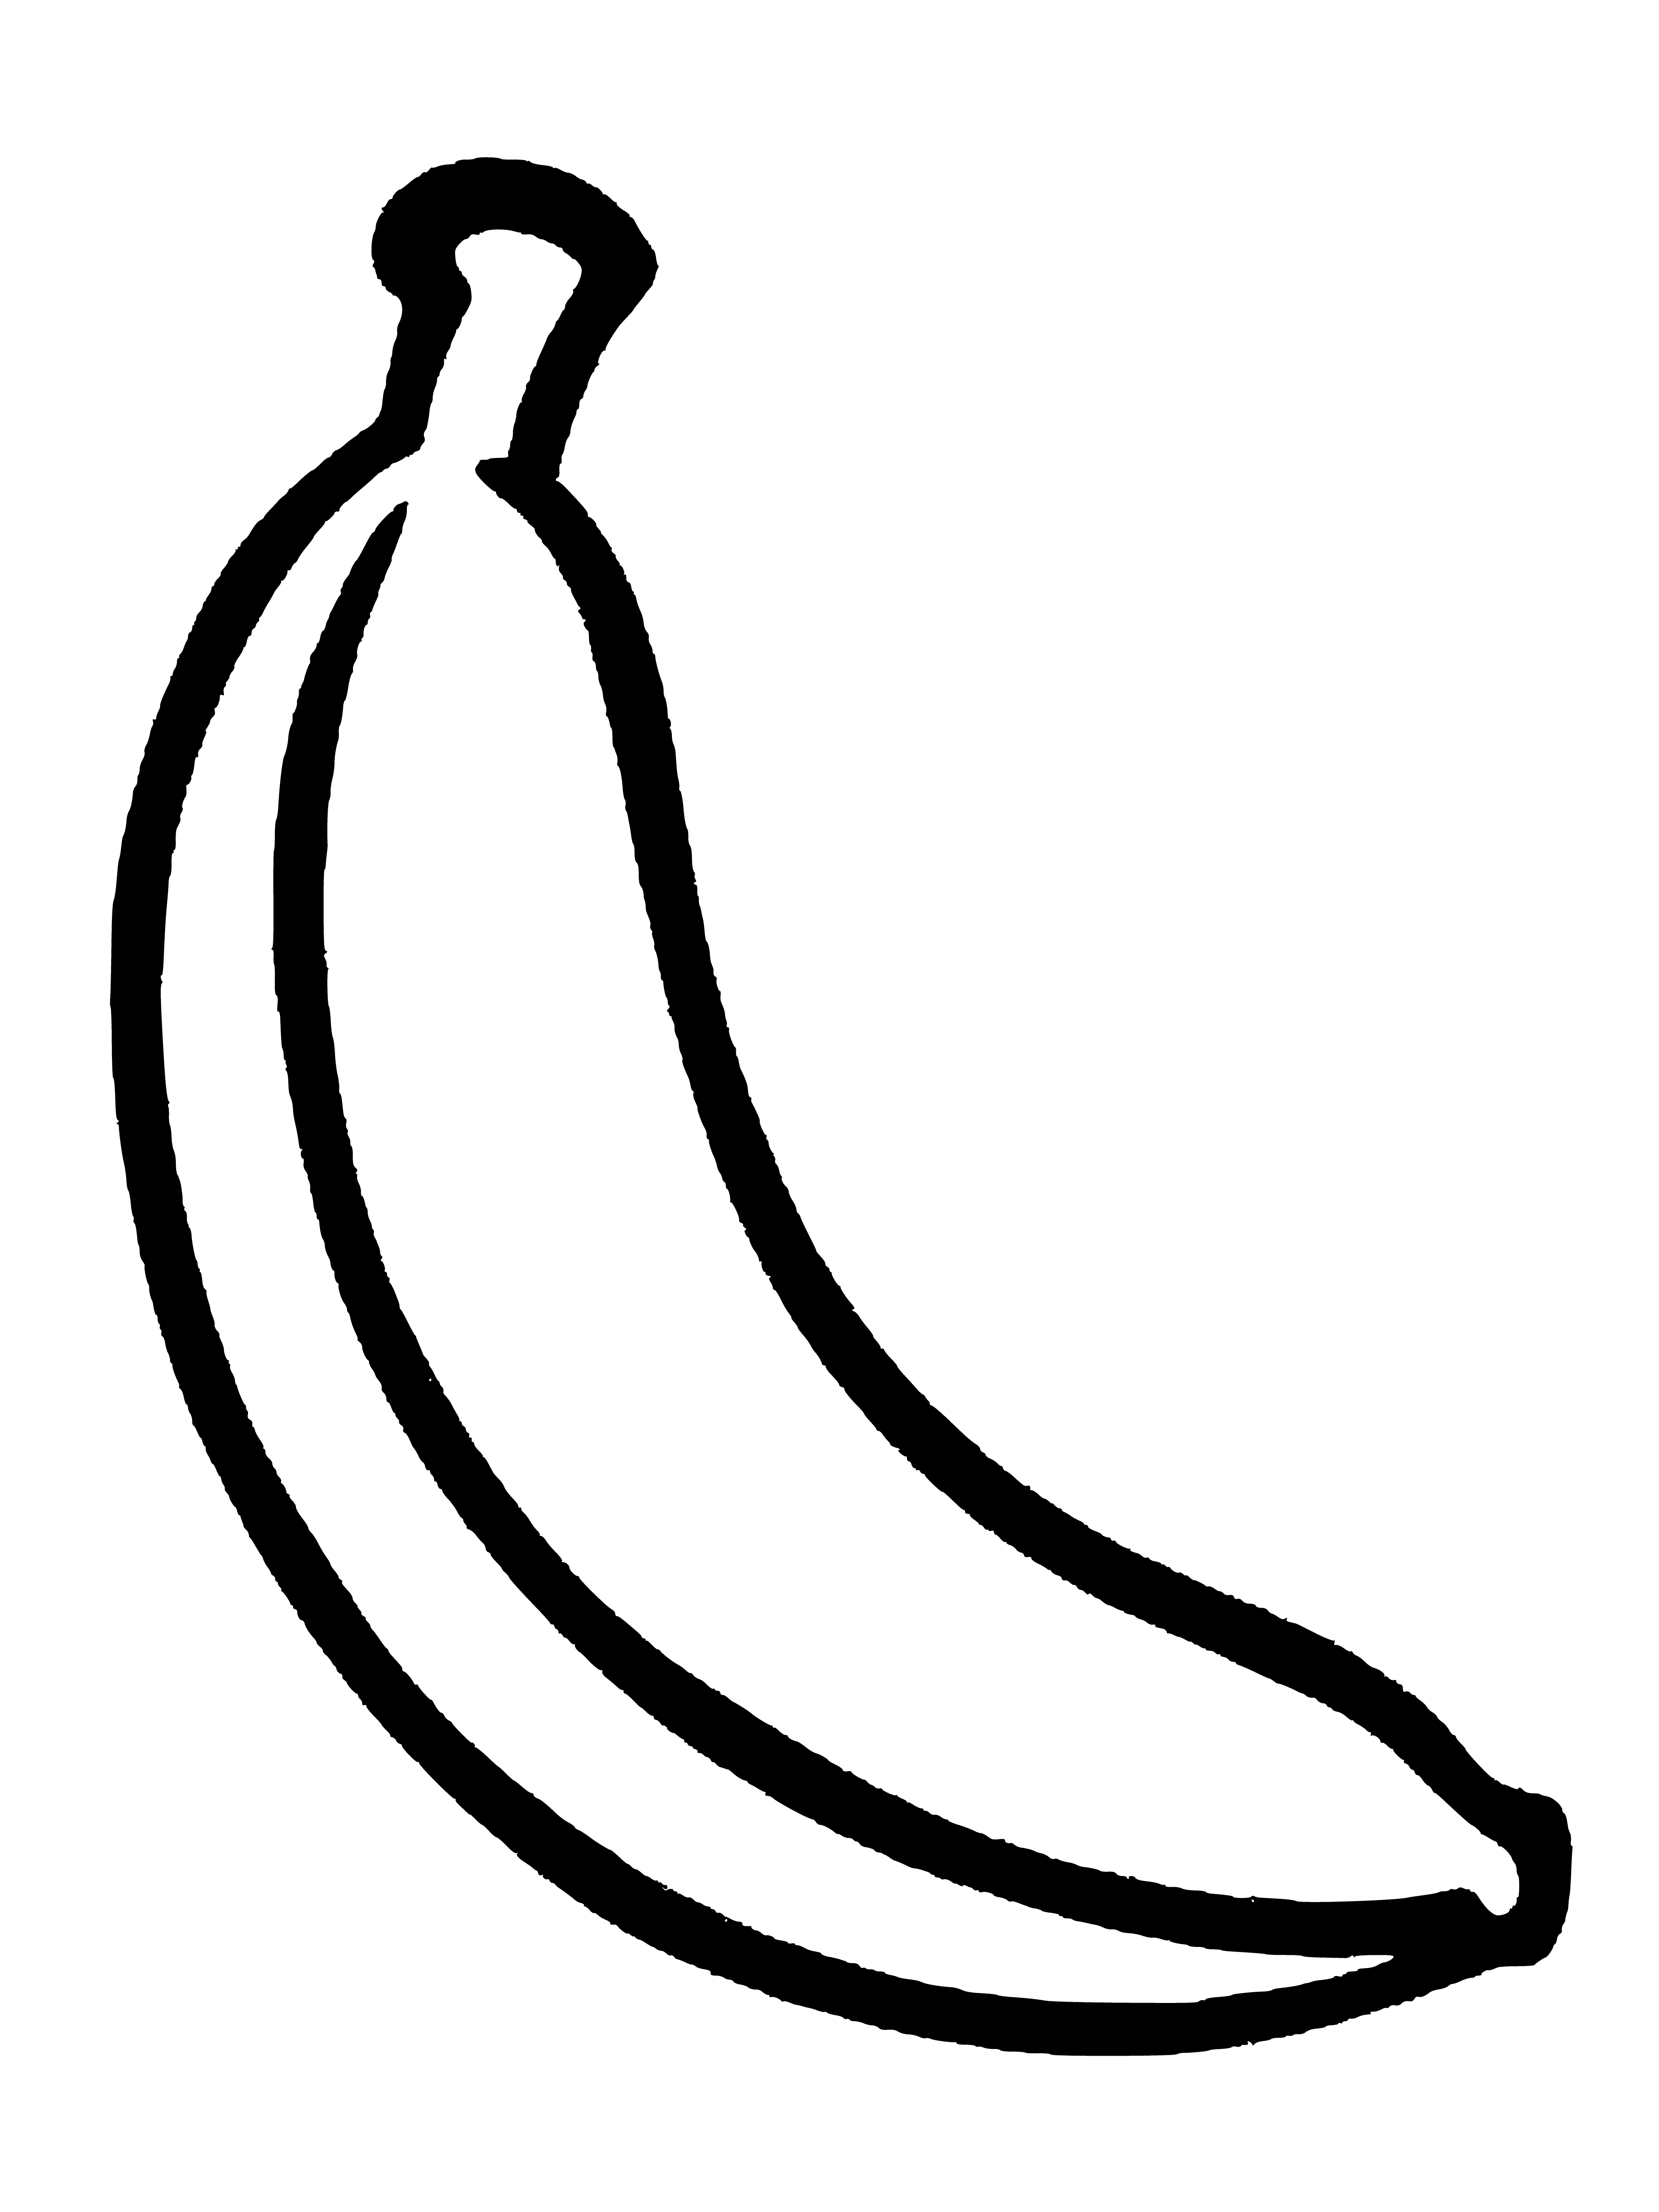 coloring page: Bite taken out of yellow banana with brown spots; end is cut off. #bananas #snacking